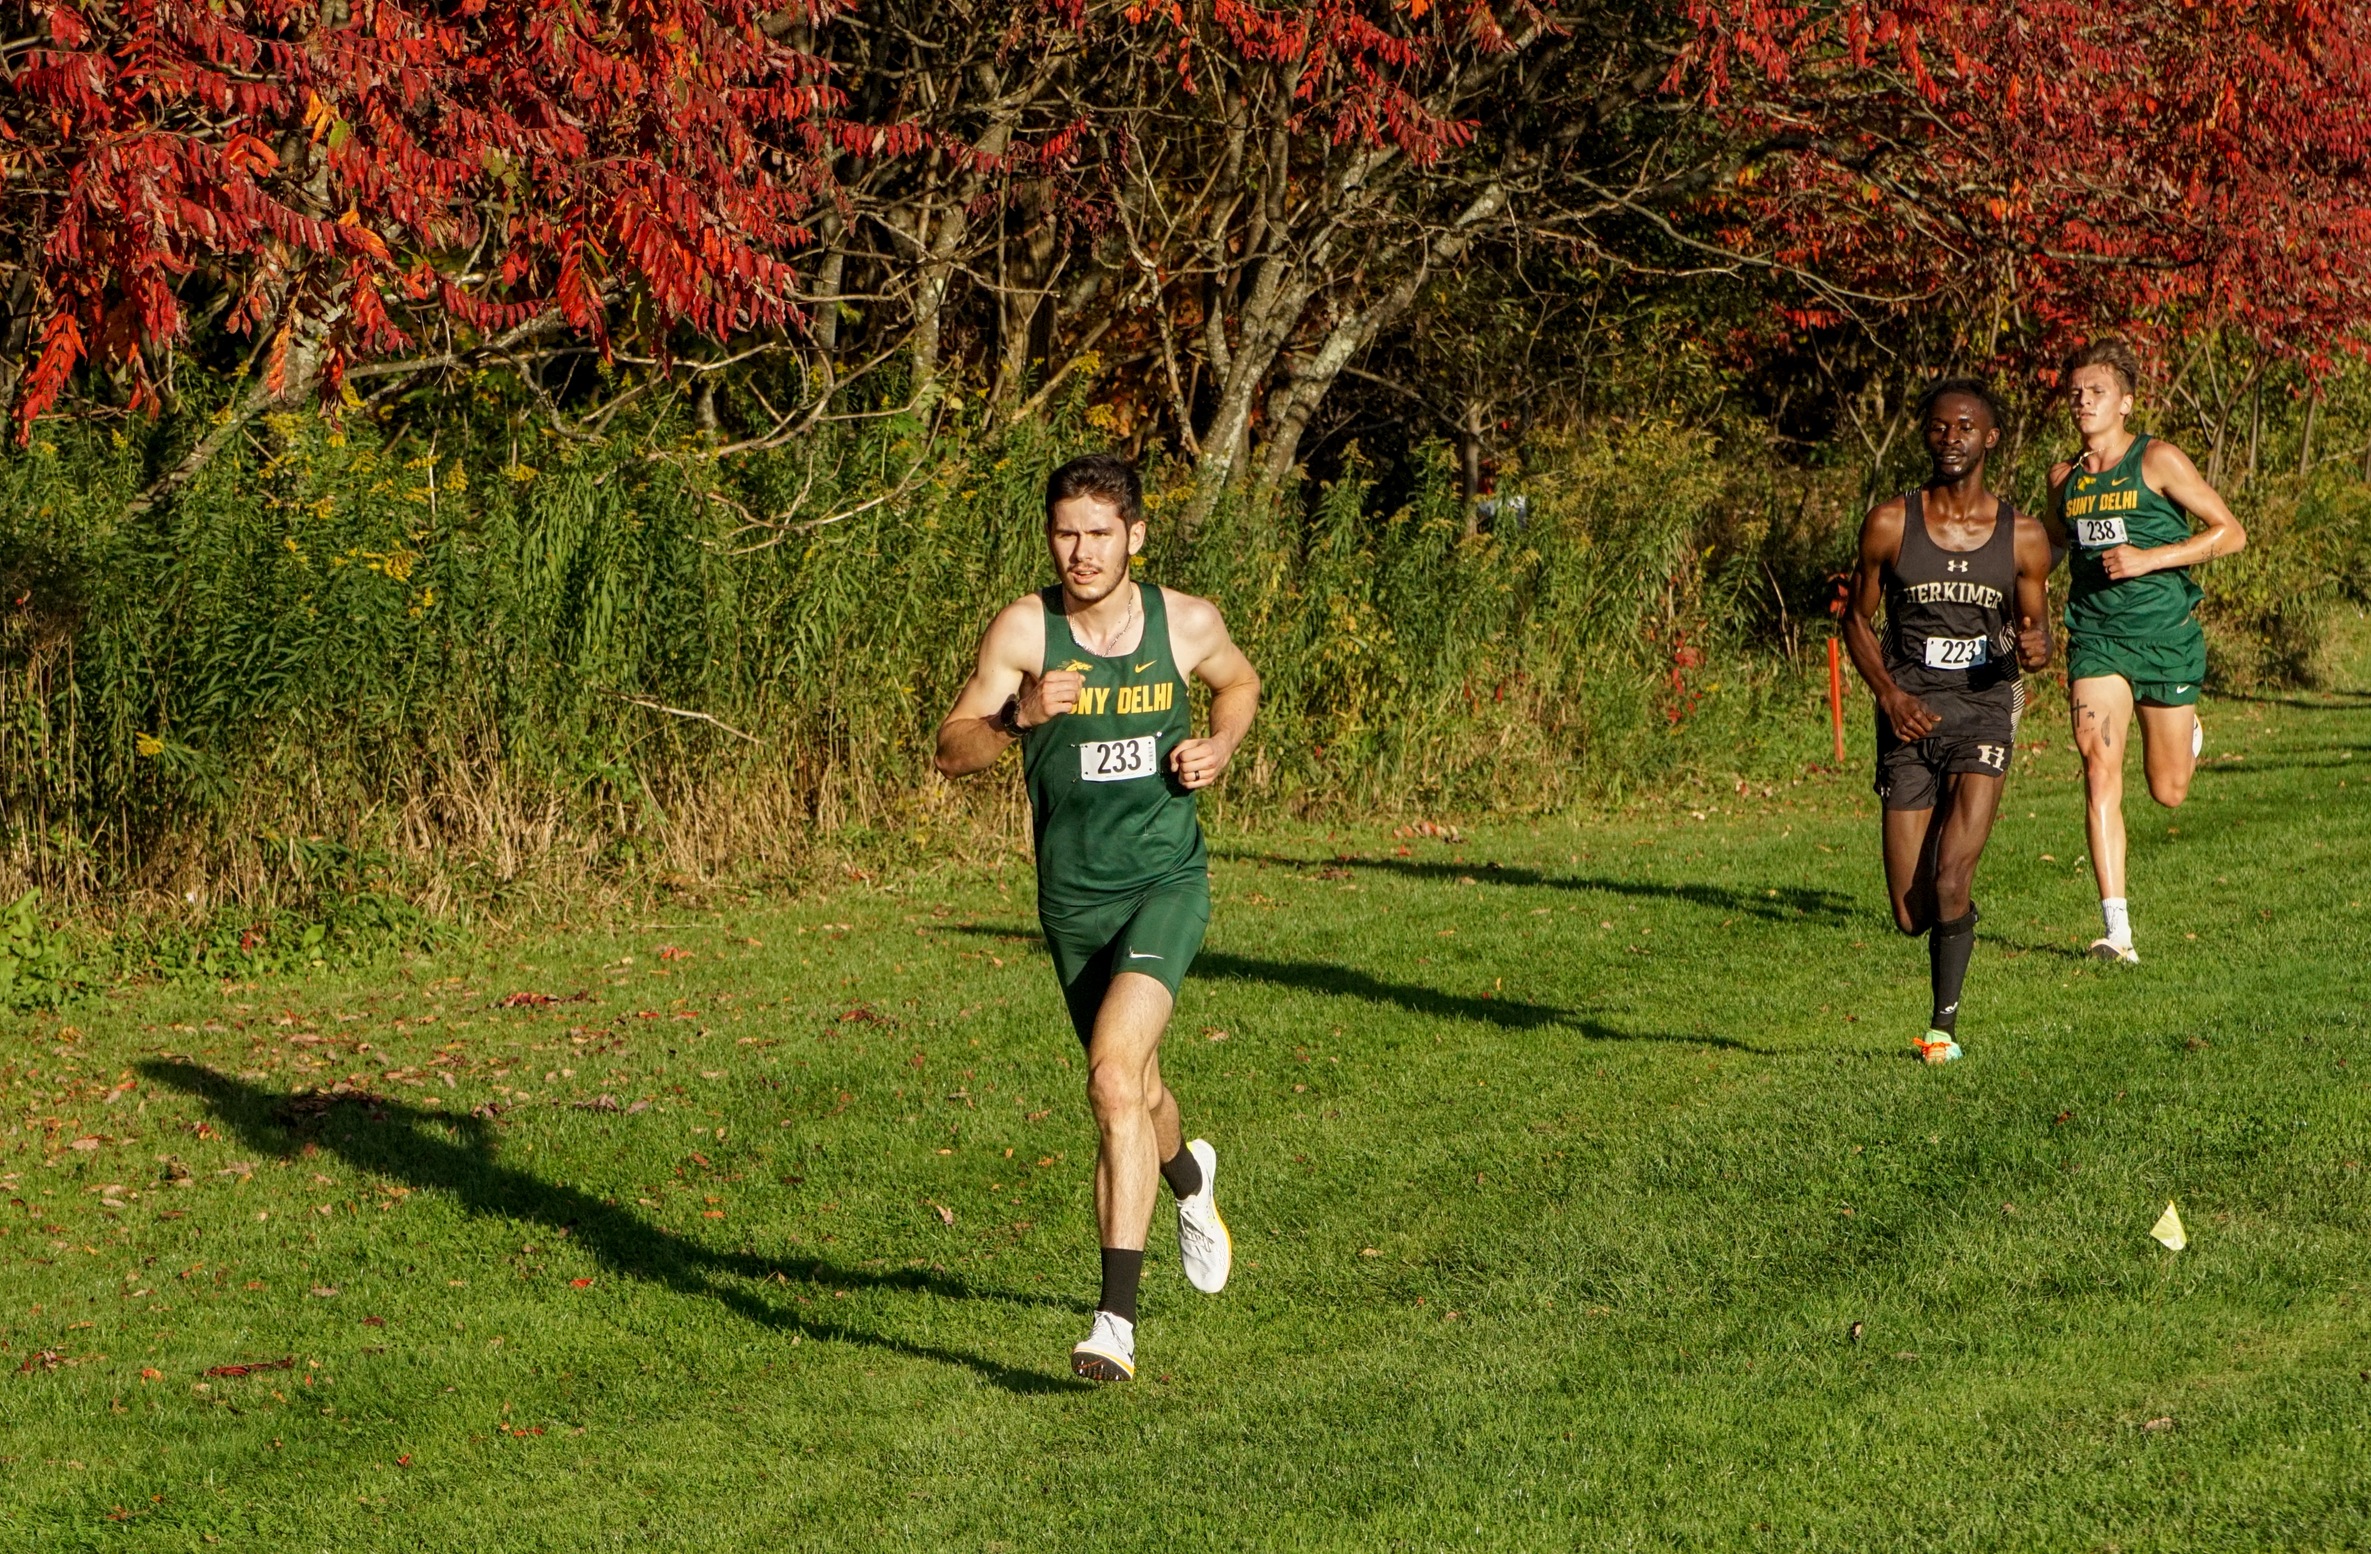 Delhi Cross Country takes home top spots in 25th Annual Bronco Classic